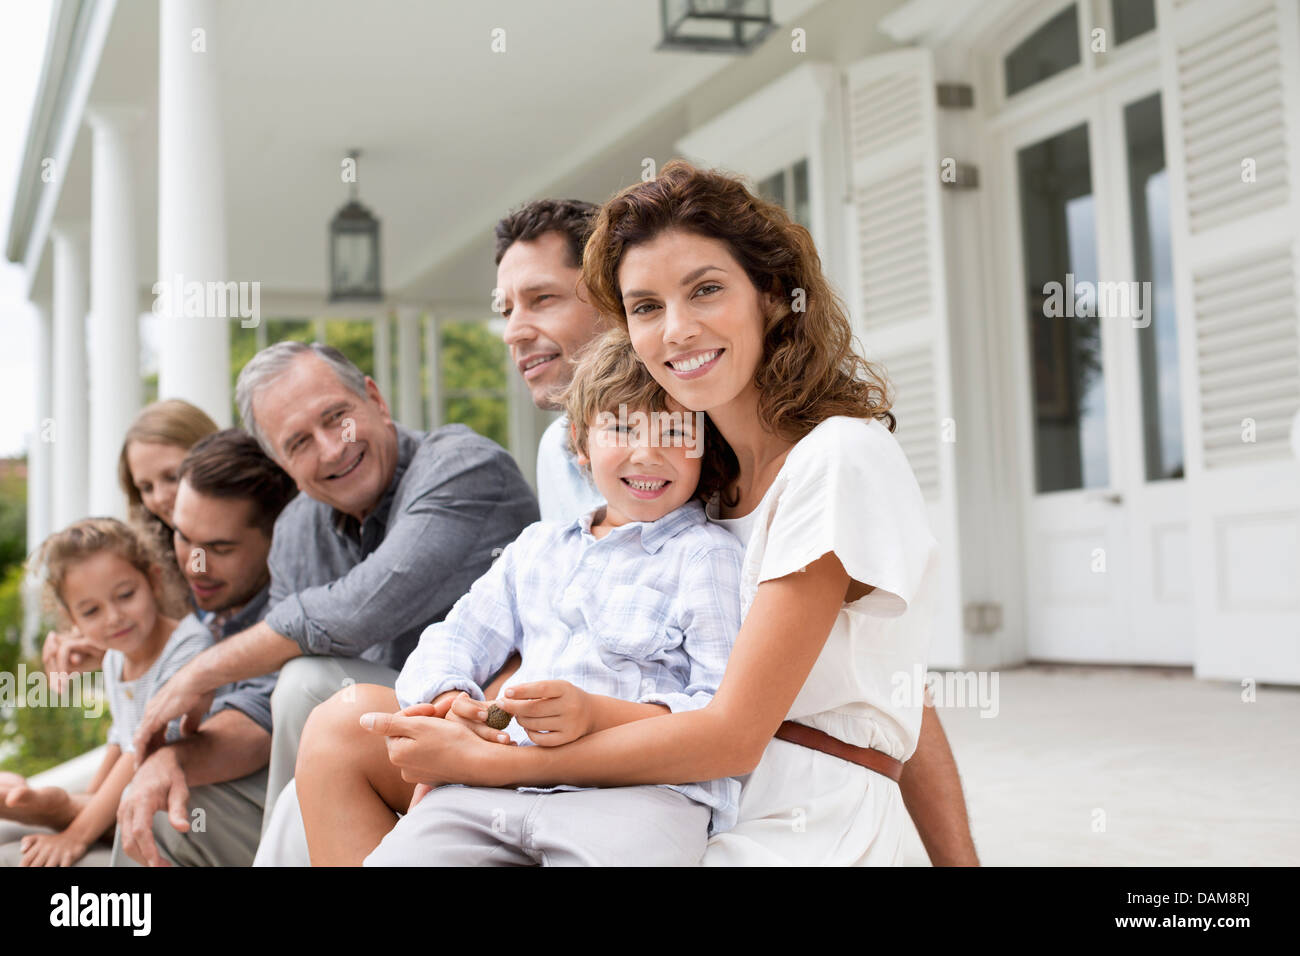 Family relaxing on porch together Stock Photo